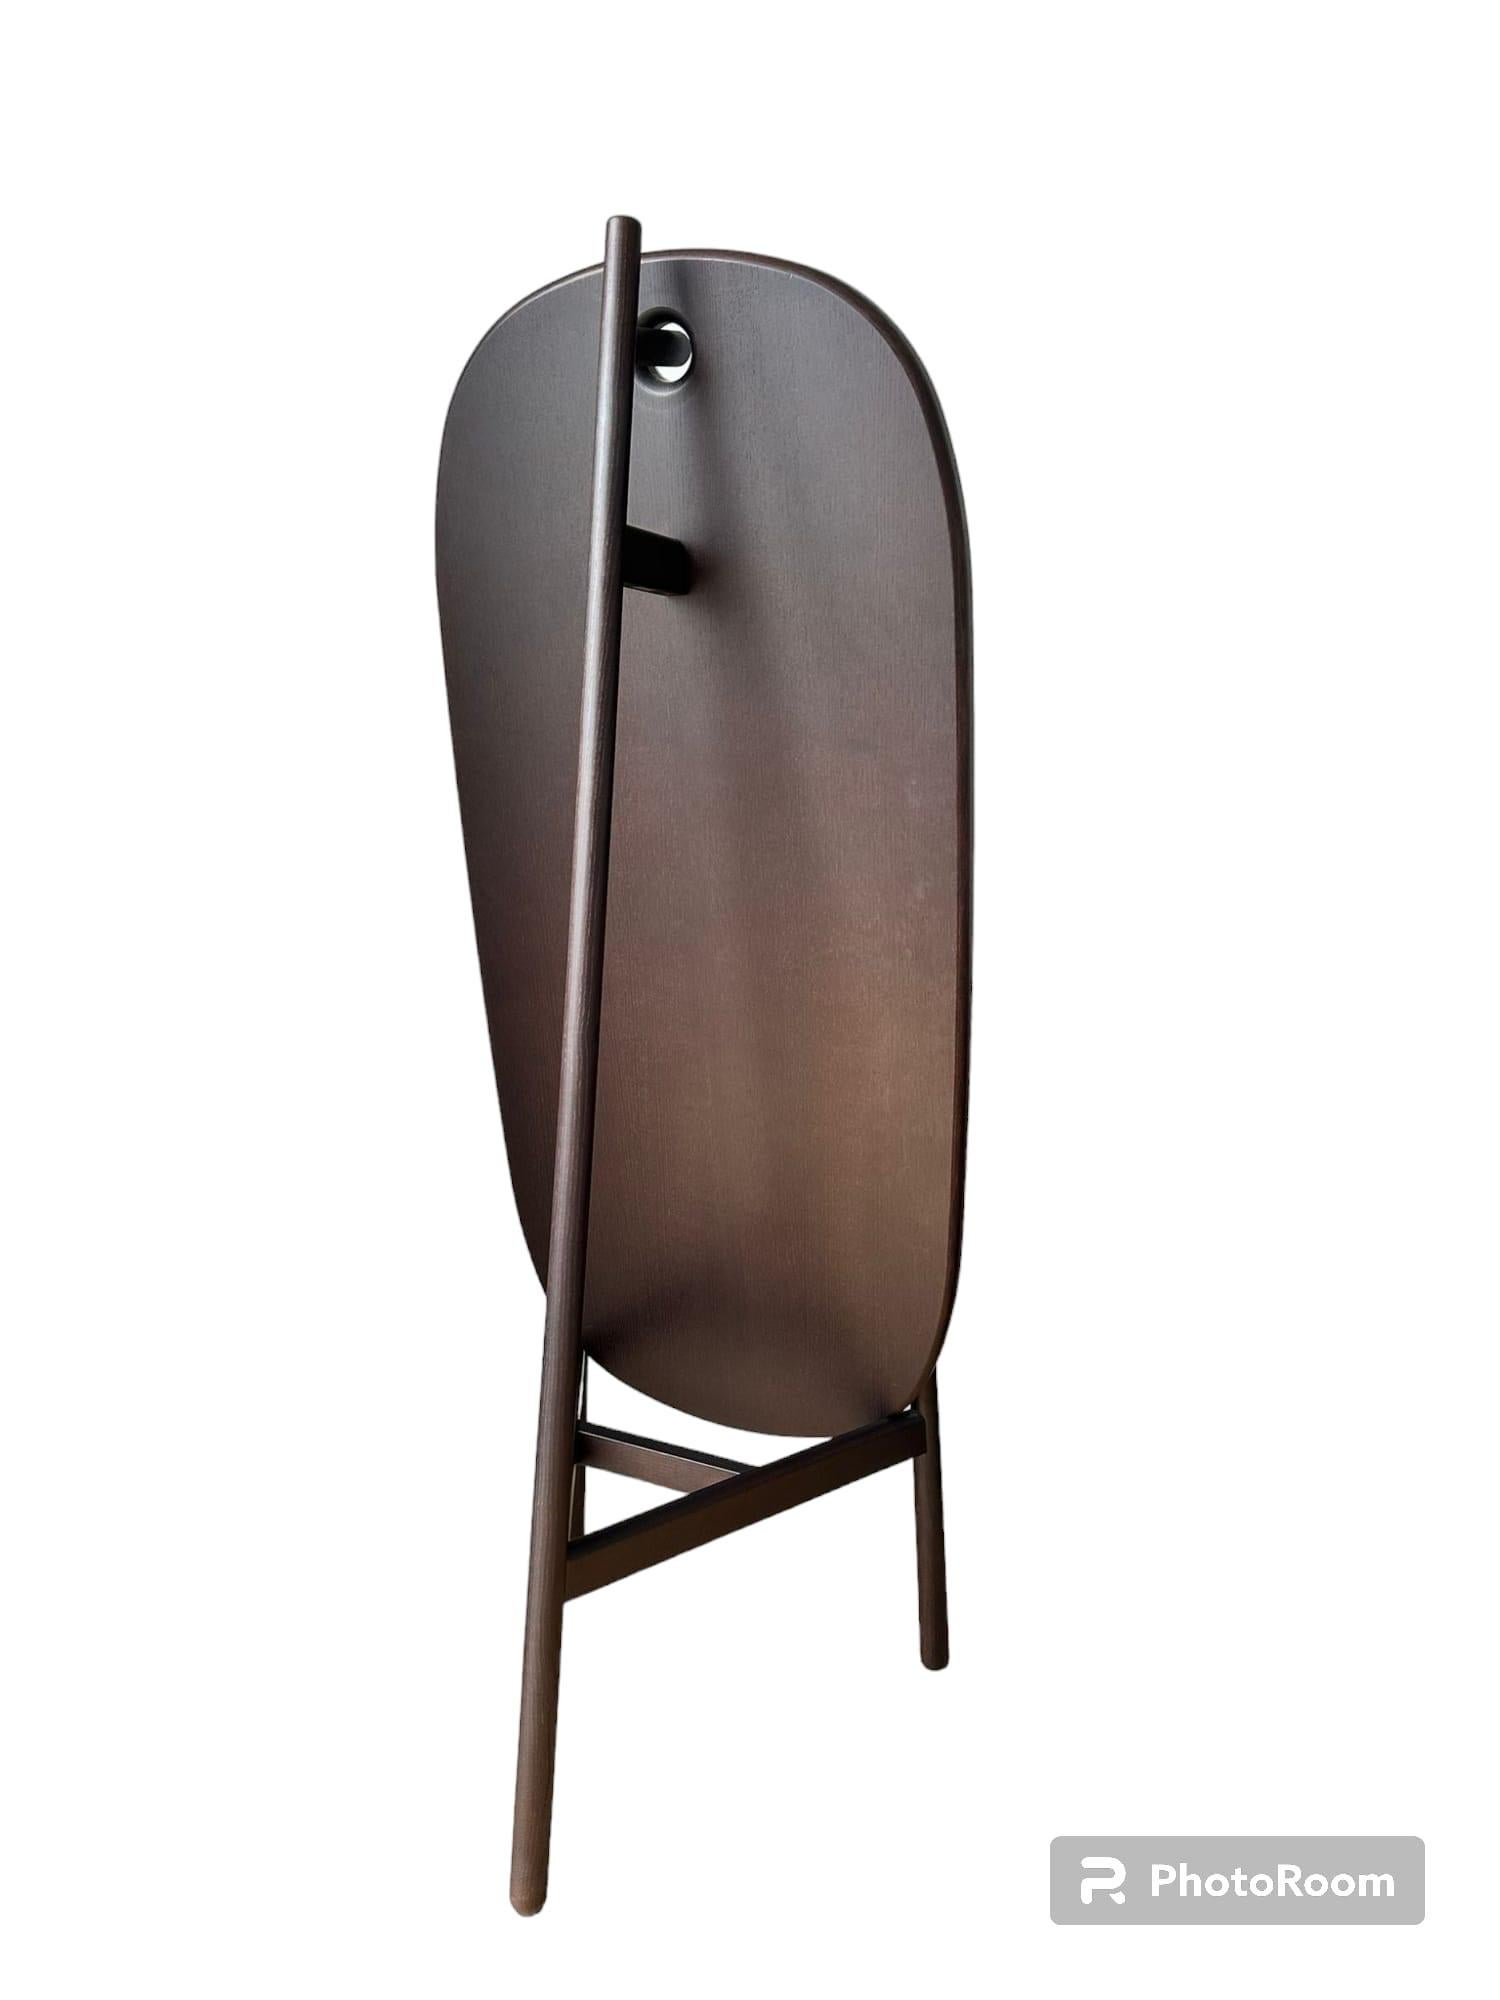 PEG STANDING MIRROR Cappellini In Good Condition For Sale In London, GB